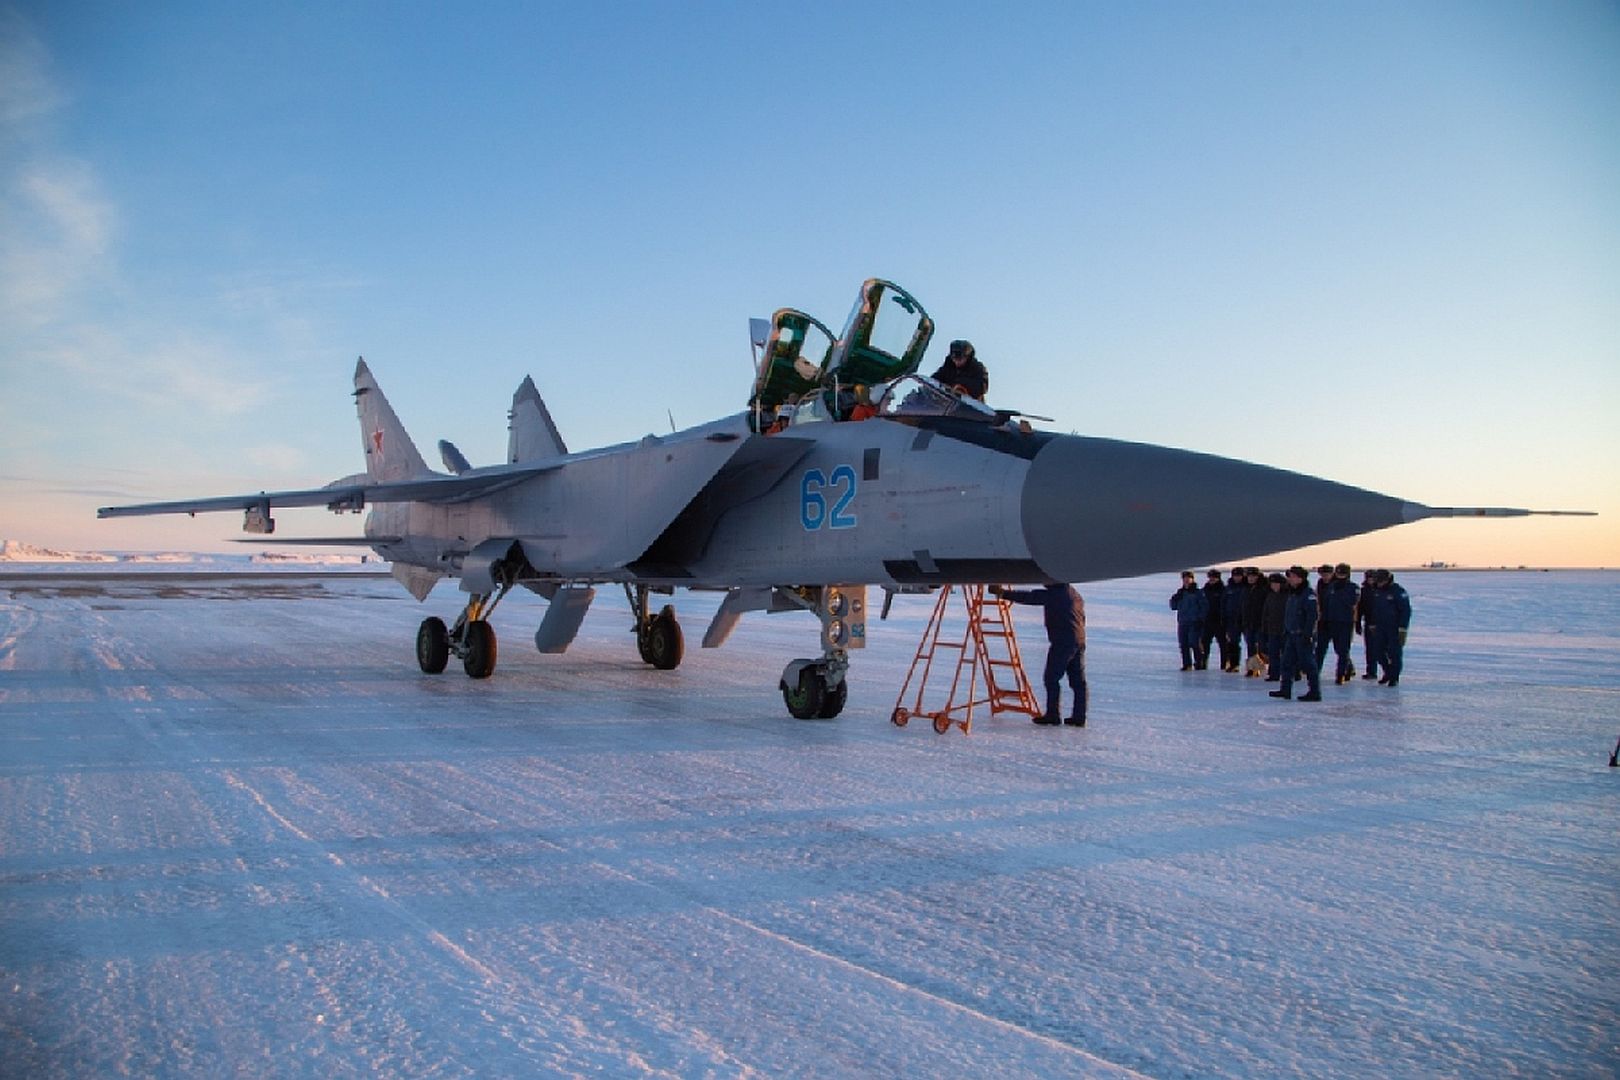 31BM Fighters Of A Separate Mixed Air Regiment Took Place At The Rogachevo Airfield Of The Northern Fleet